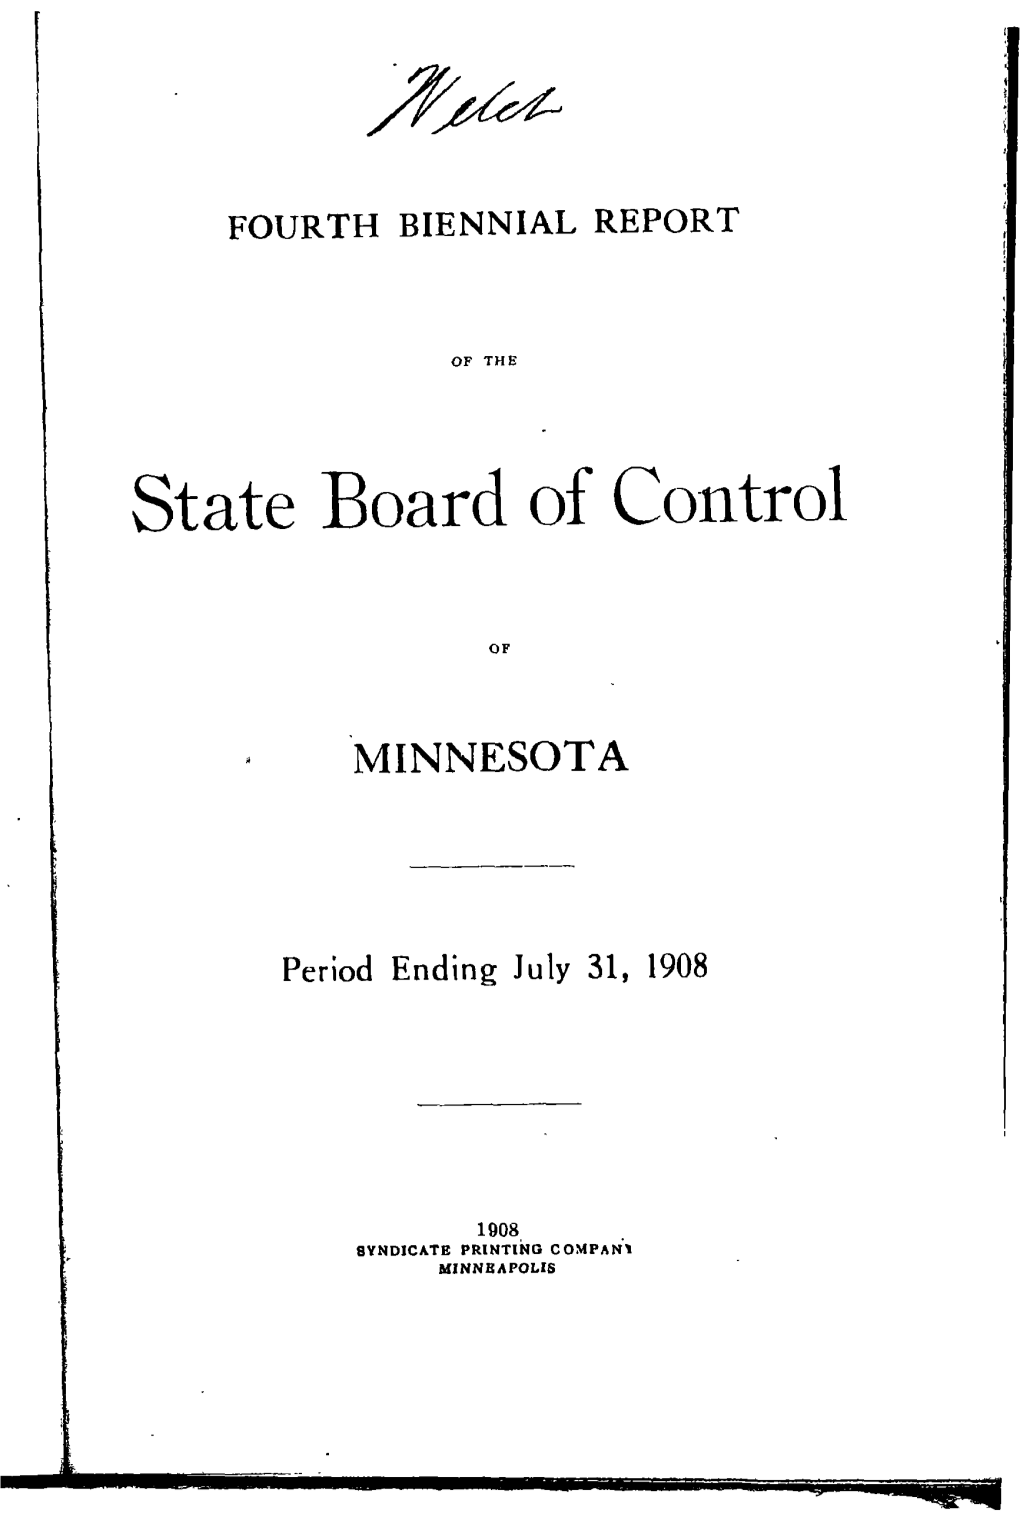 State Board of Control